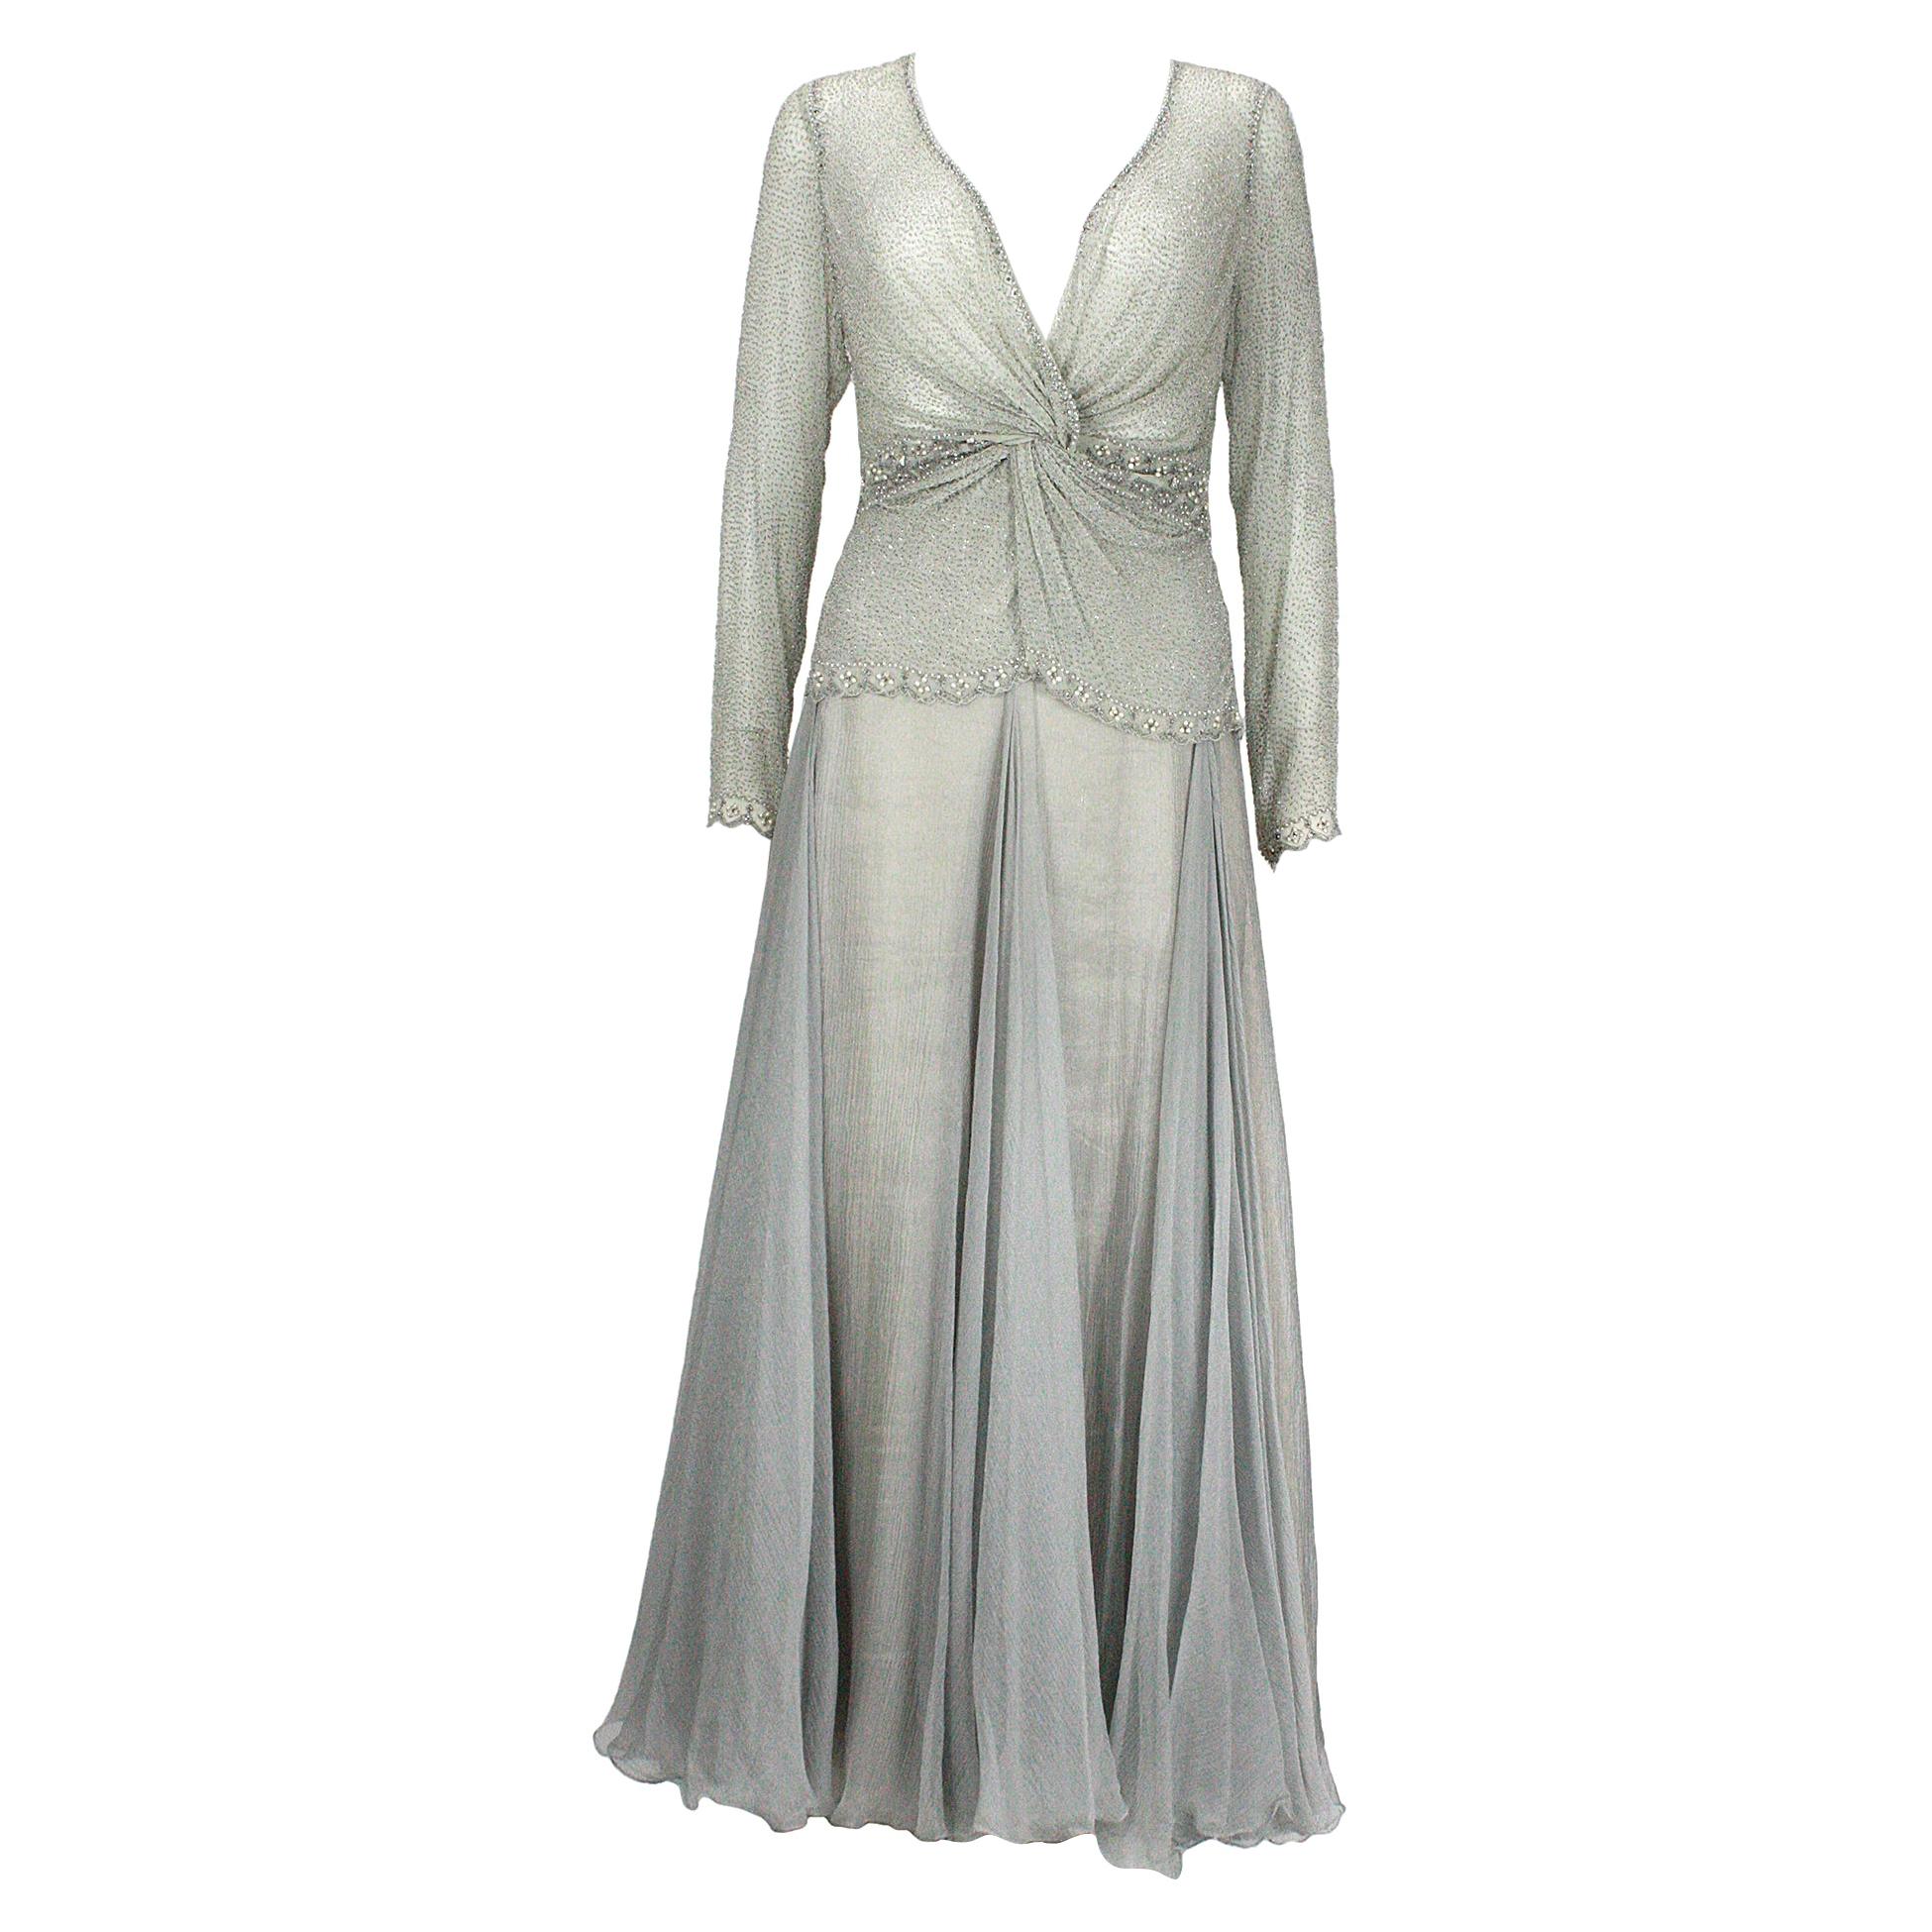 Eavis & Brown London Seafoam Chiffon Beaded Top and Long Silver Skirt  For Sale